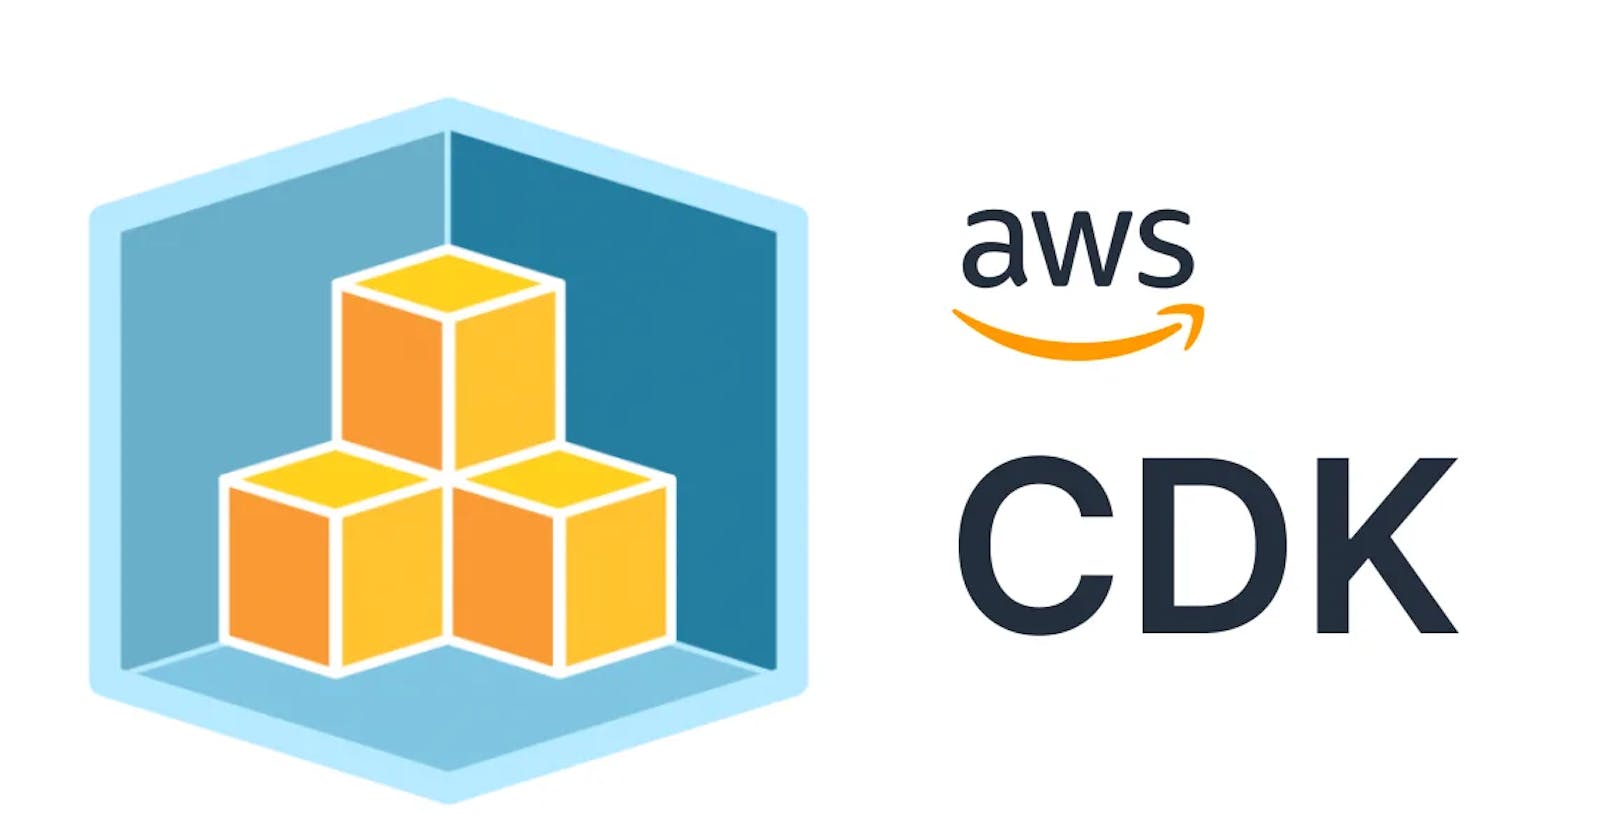 How to Deploy All Stacks in AWS CDK